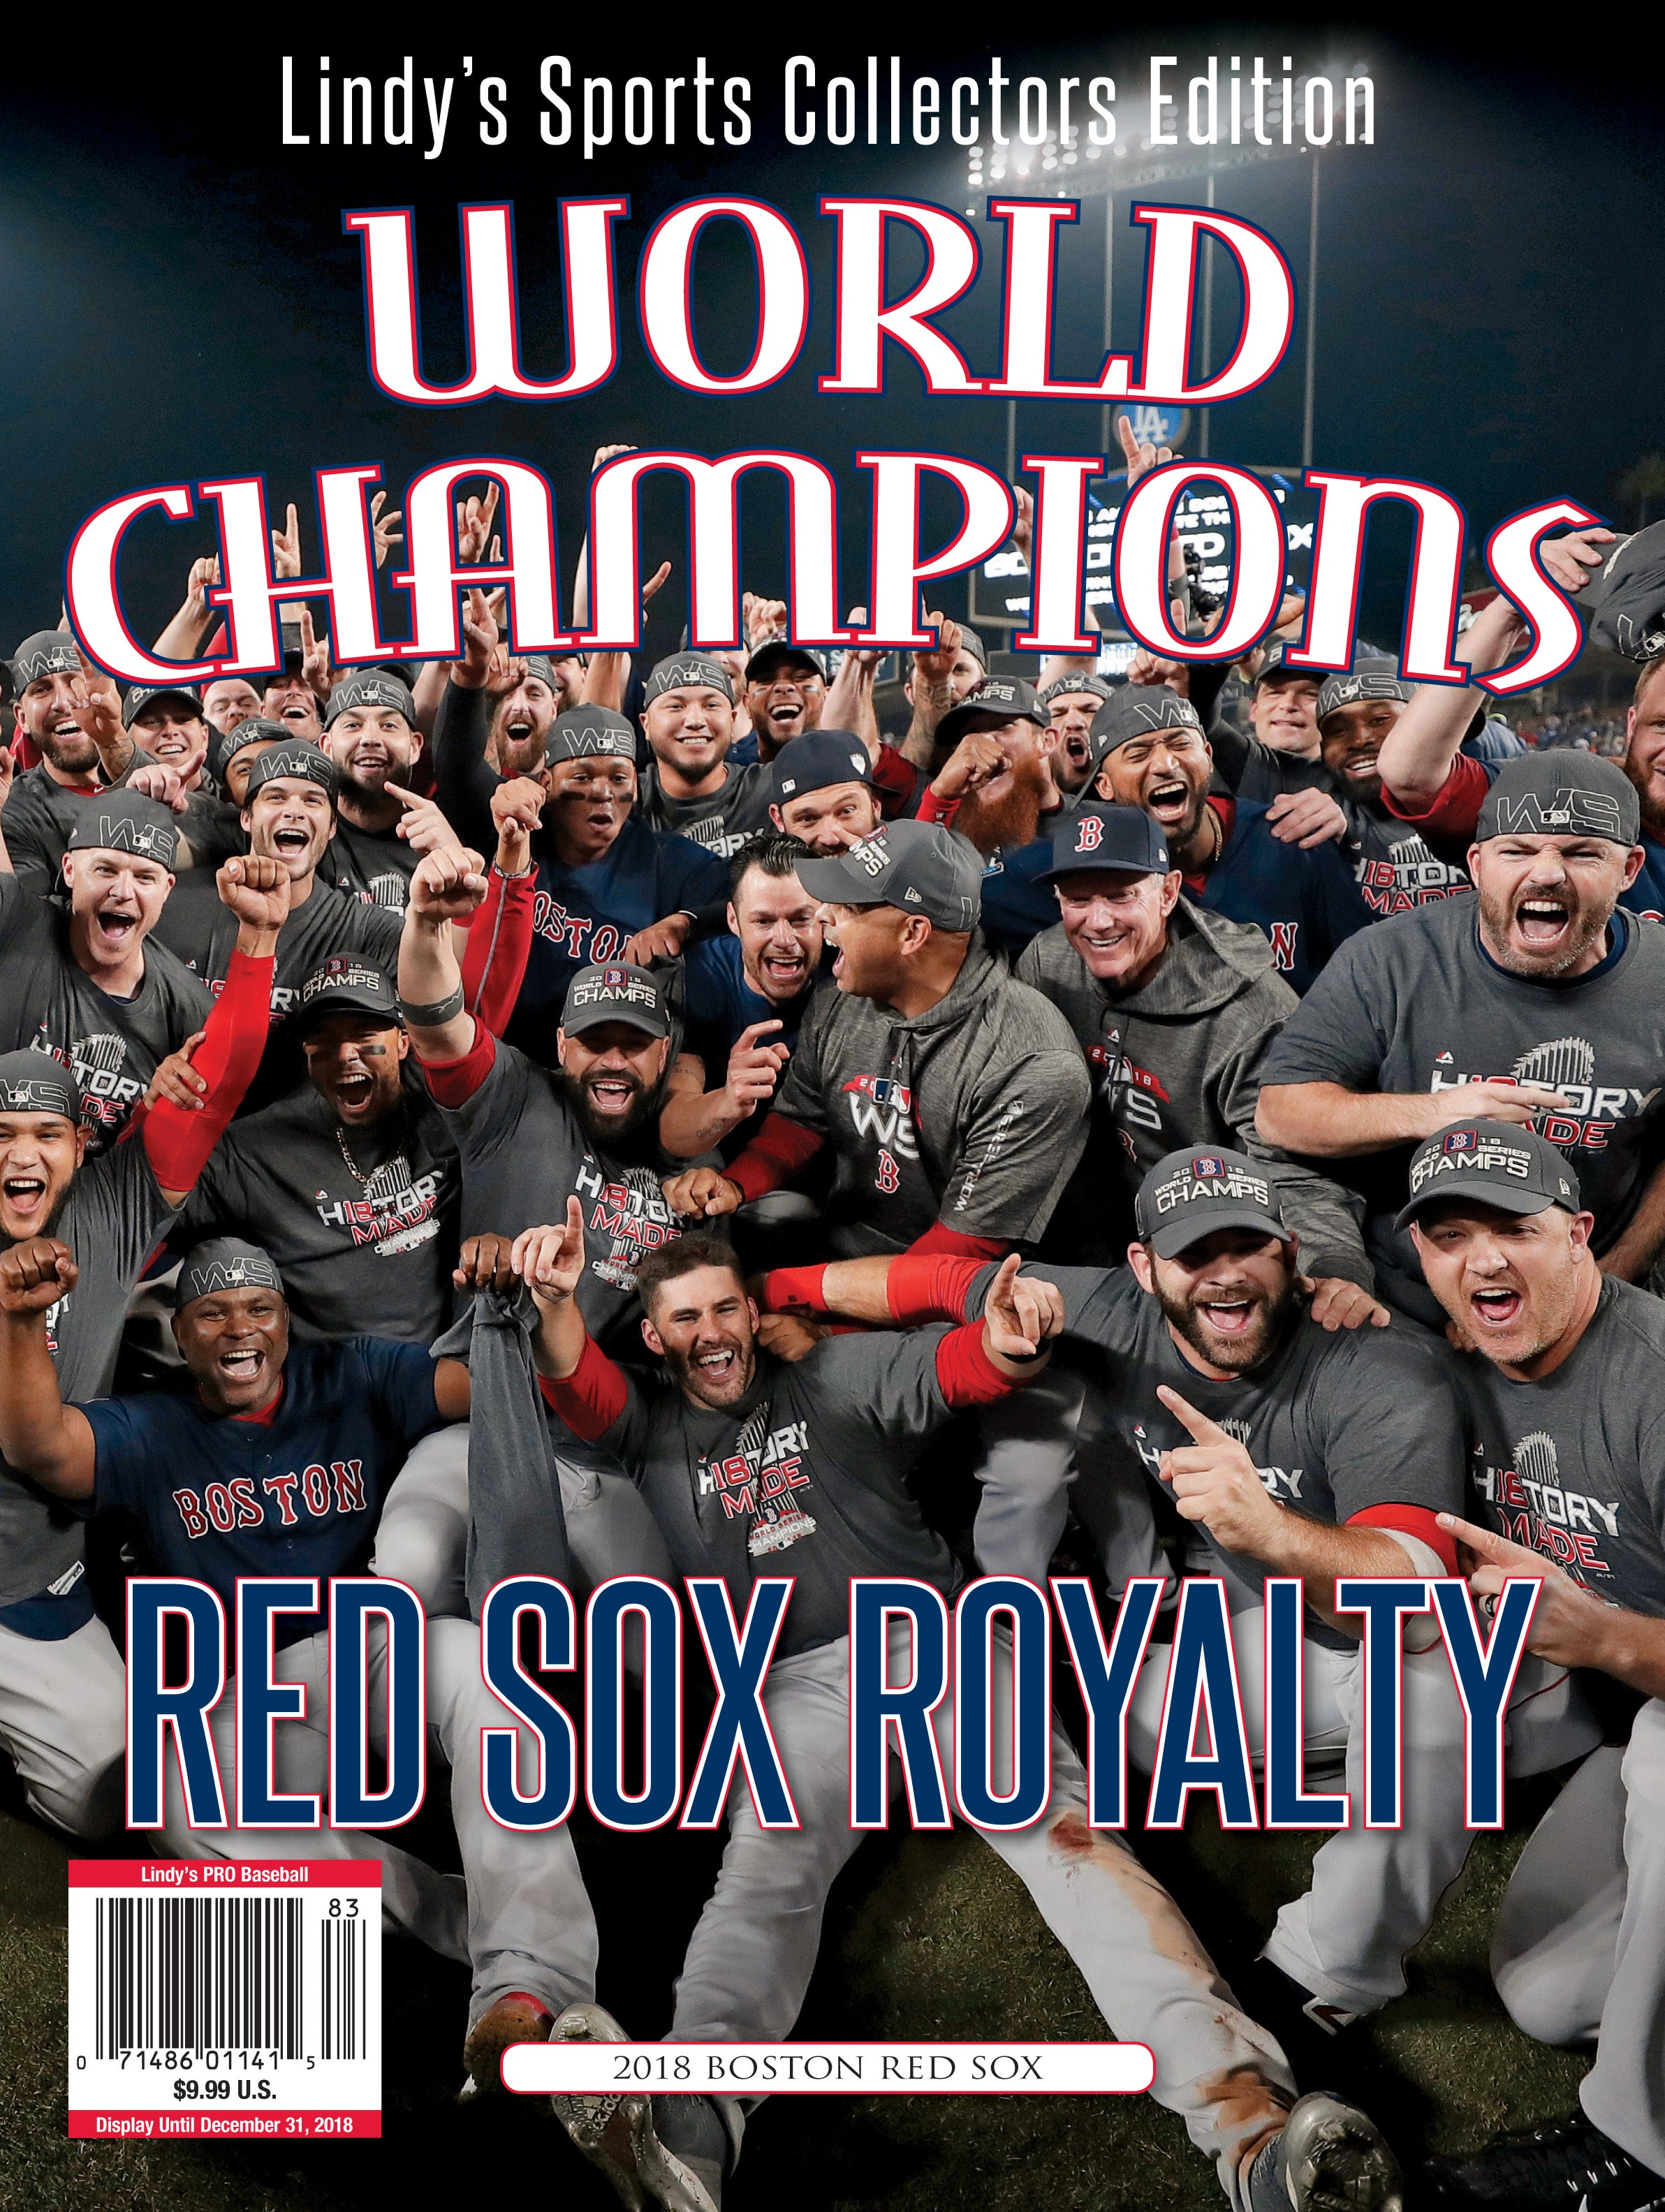 klynke justere sortie 2018 Boston Red Sox World Champions – Lindys Sports